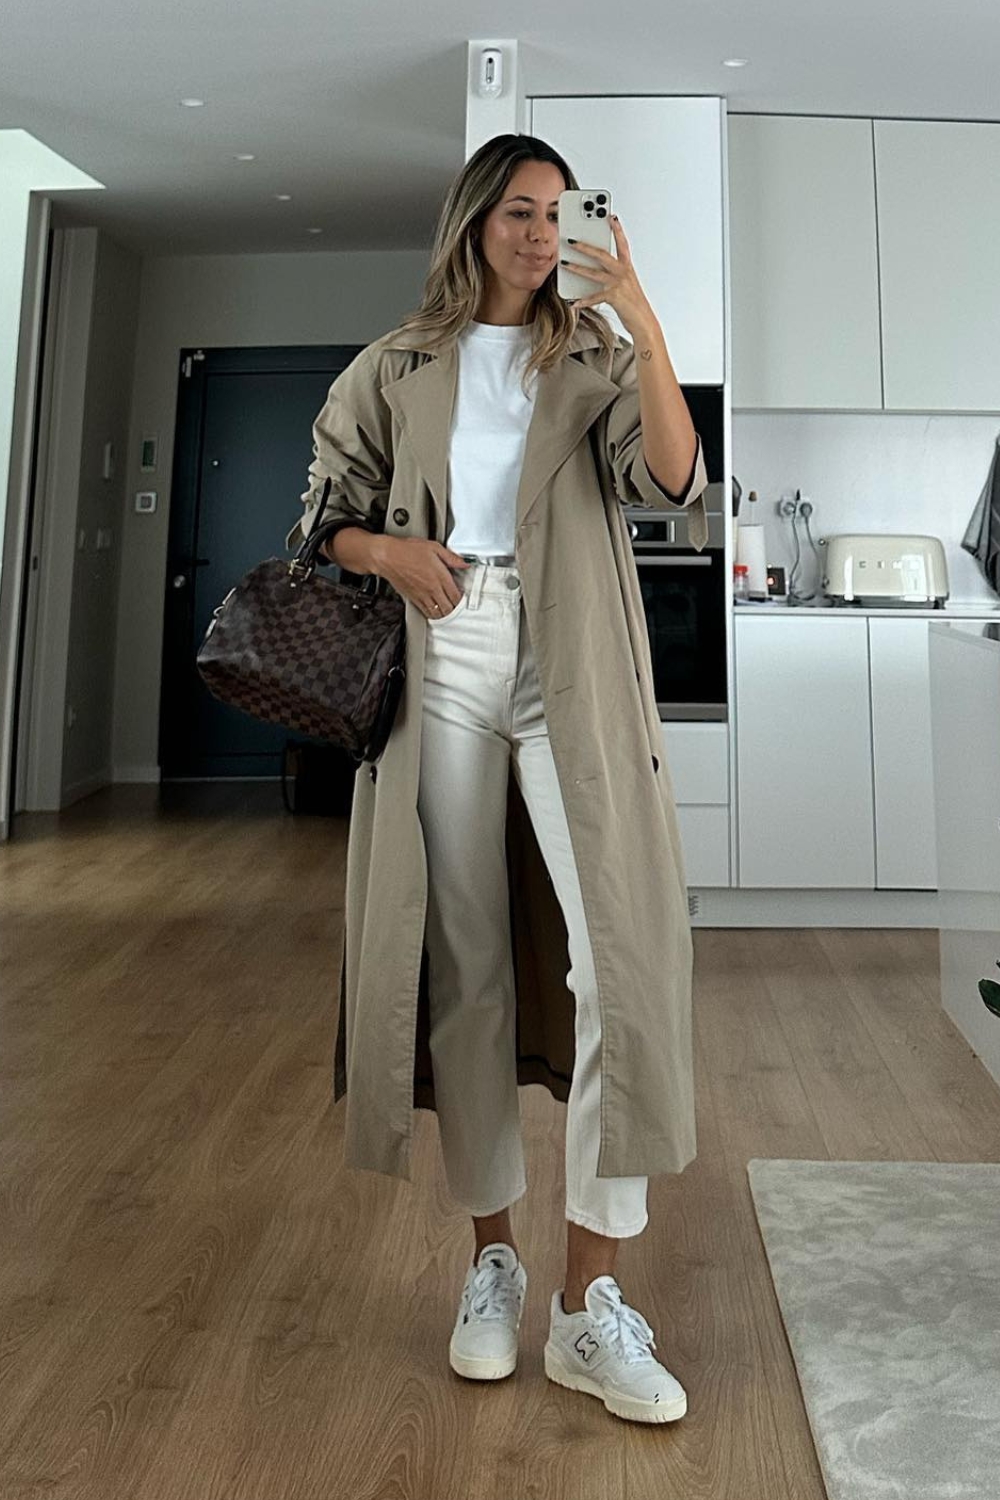 Sporty Work Outfits - White Tshirt + White Jeans + Sneakers + Trench Coat